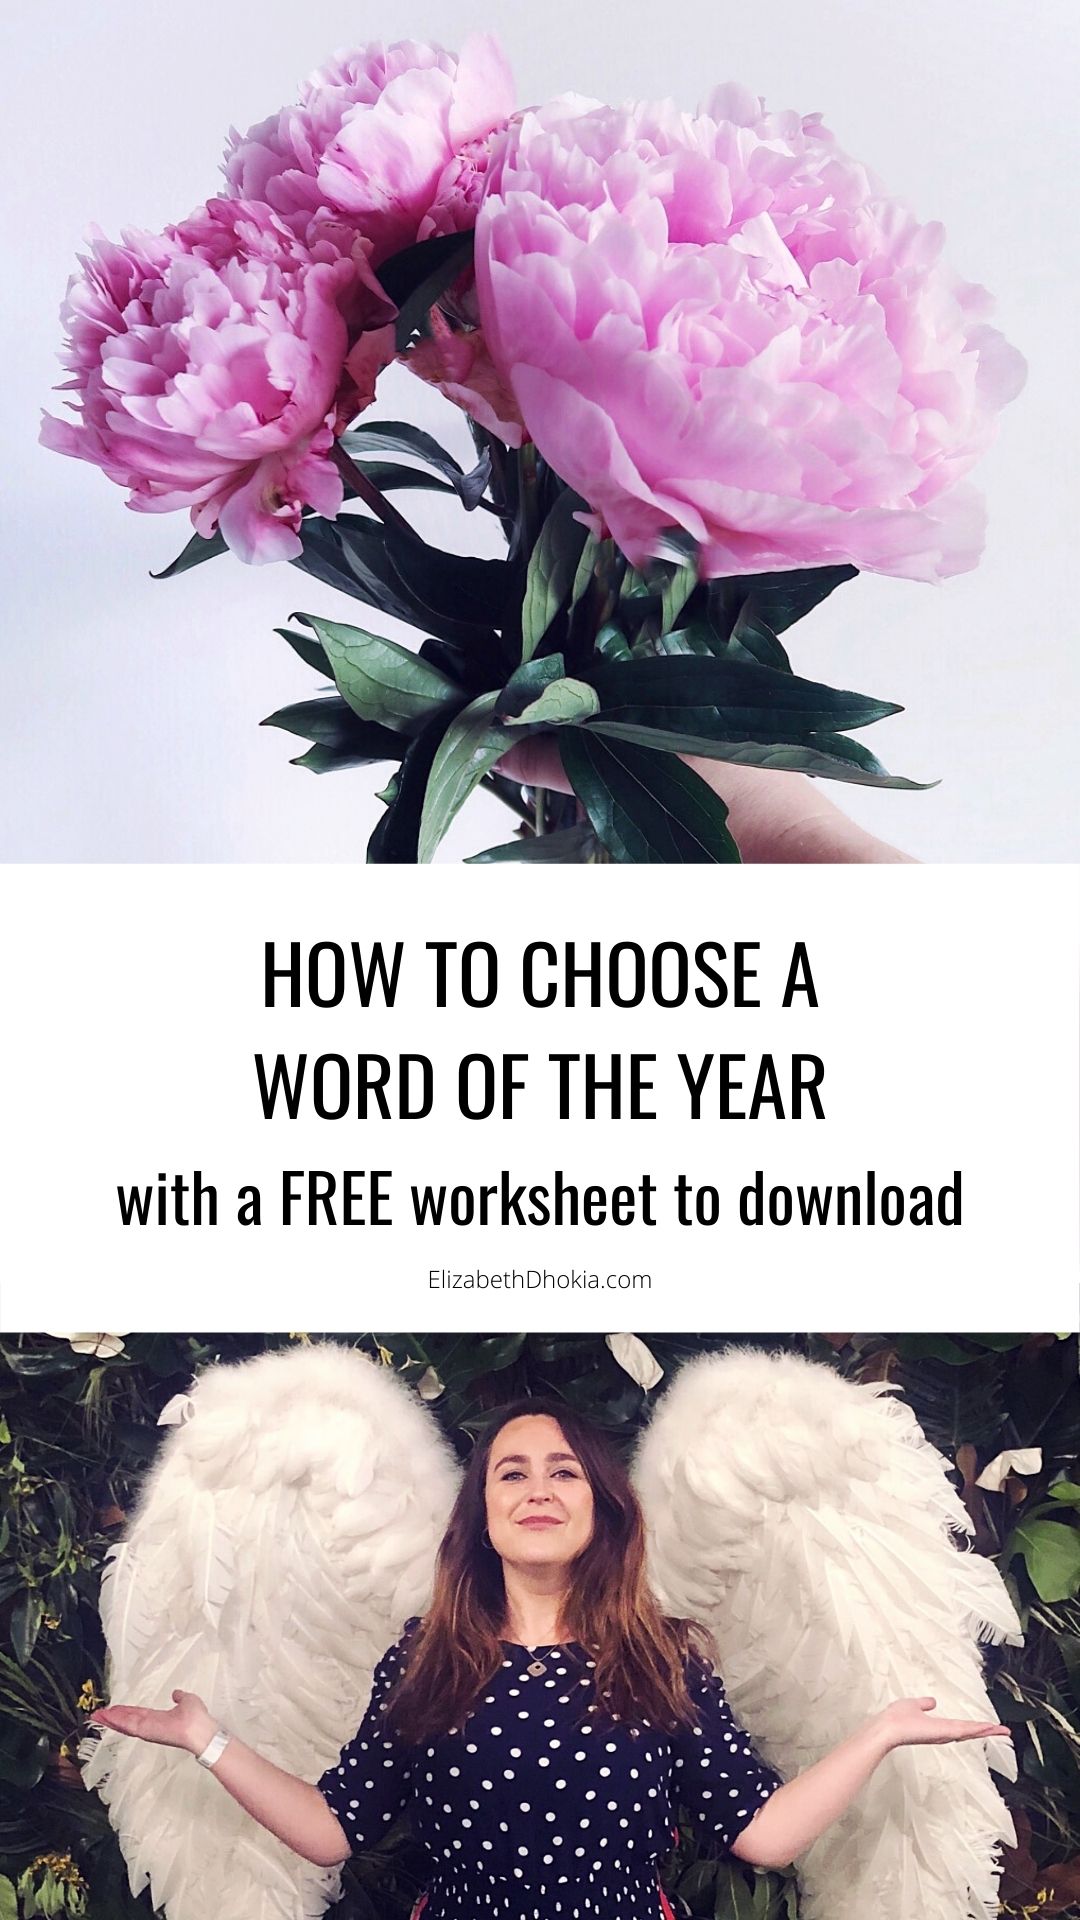 How to choose a word of the year